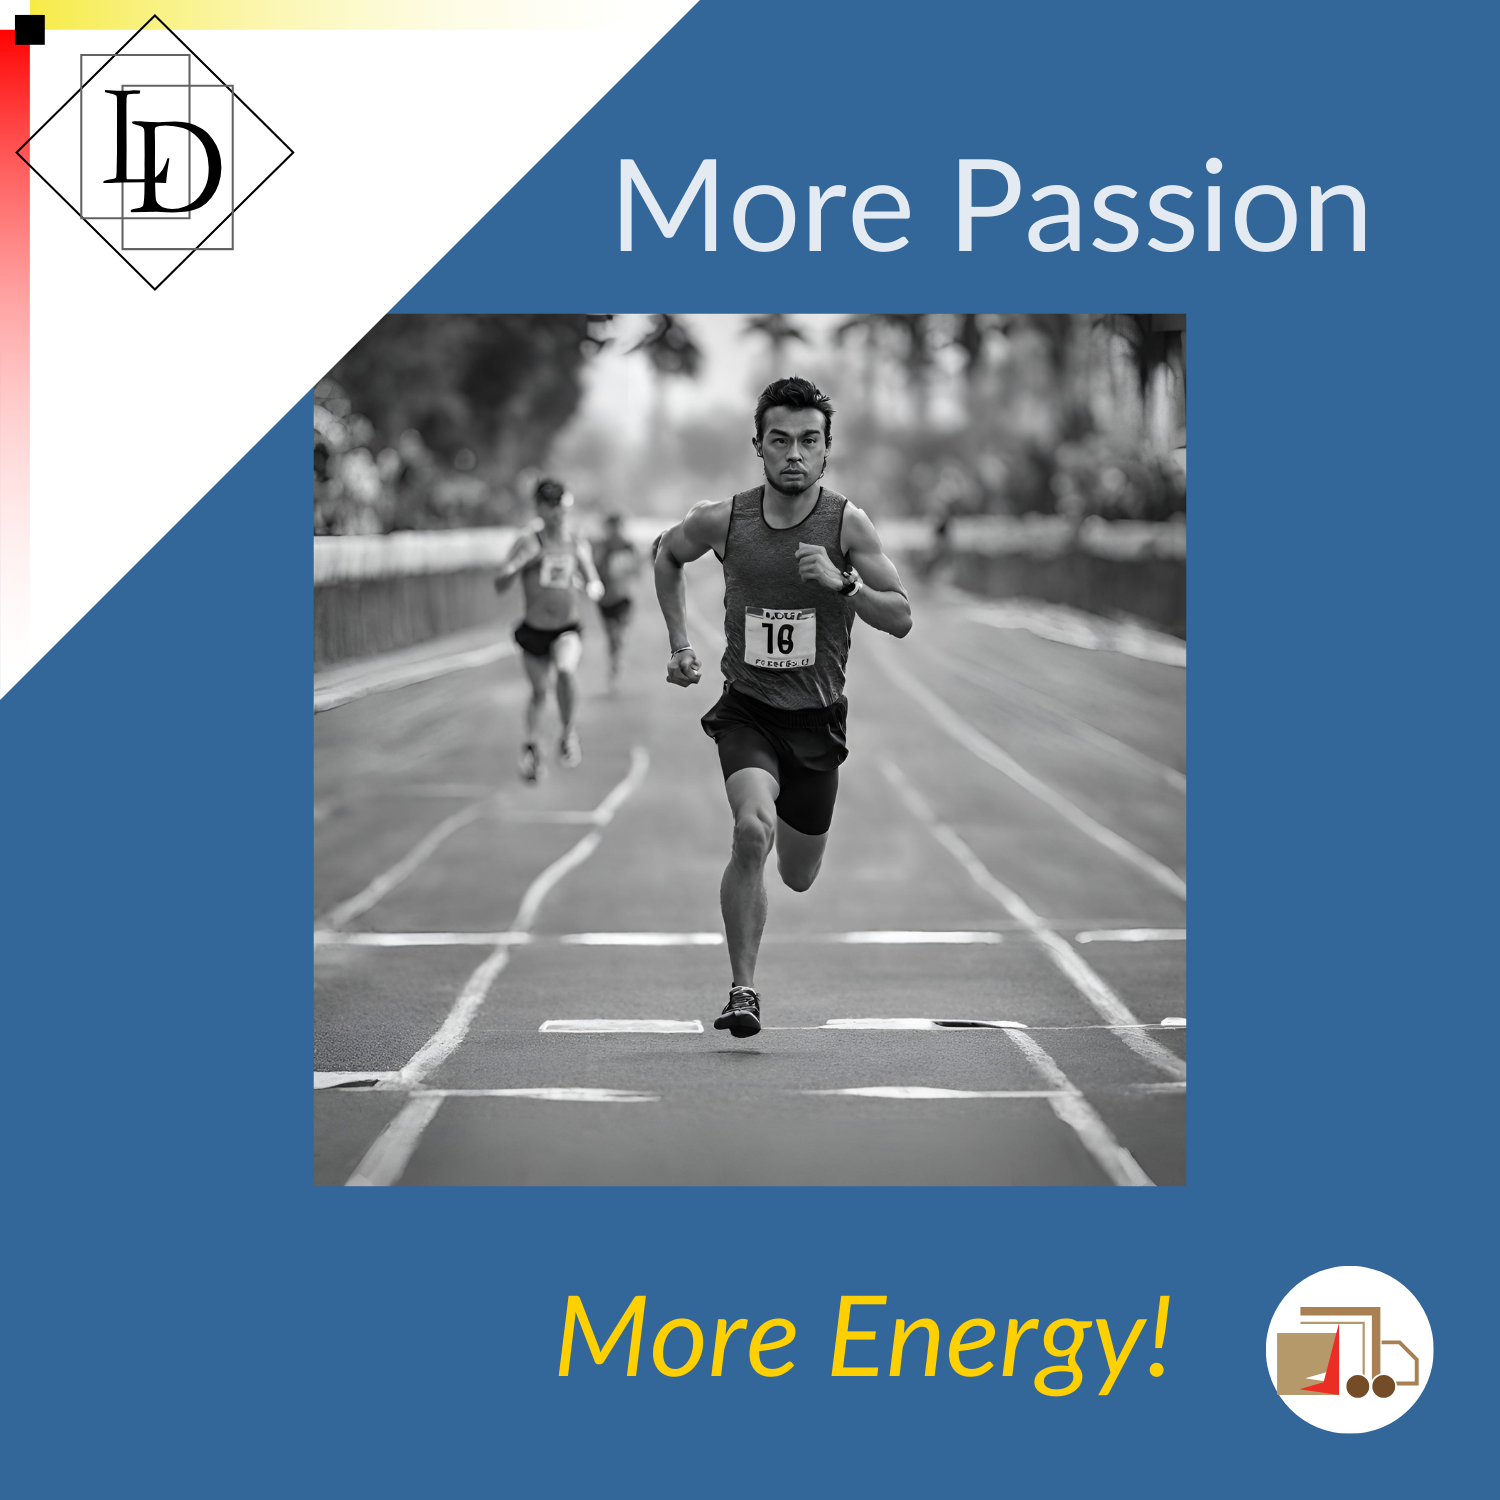 Title - more passion, more energy.  Picture of man running a race.